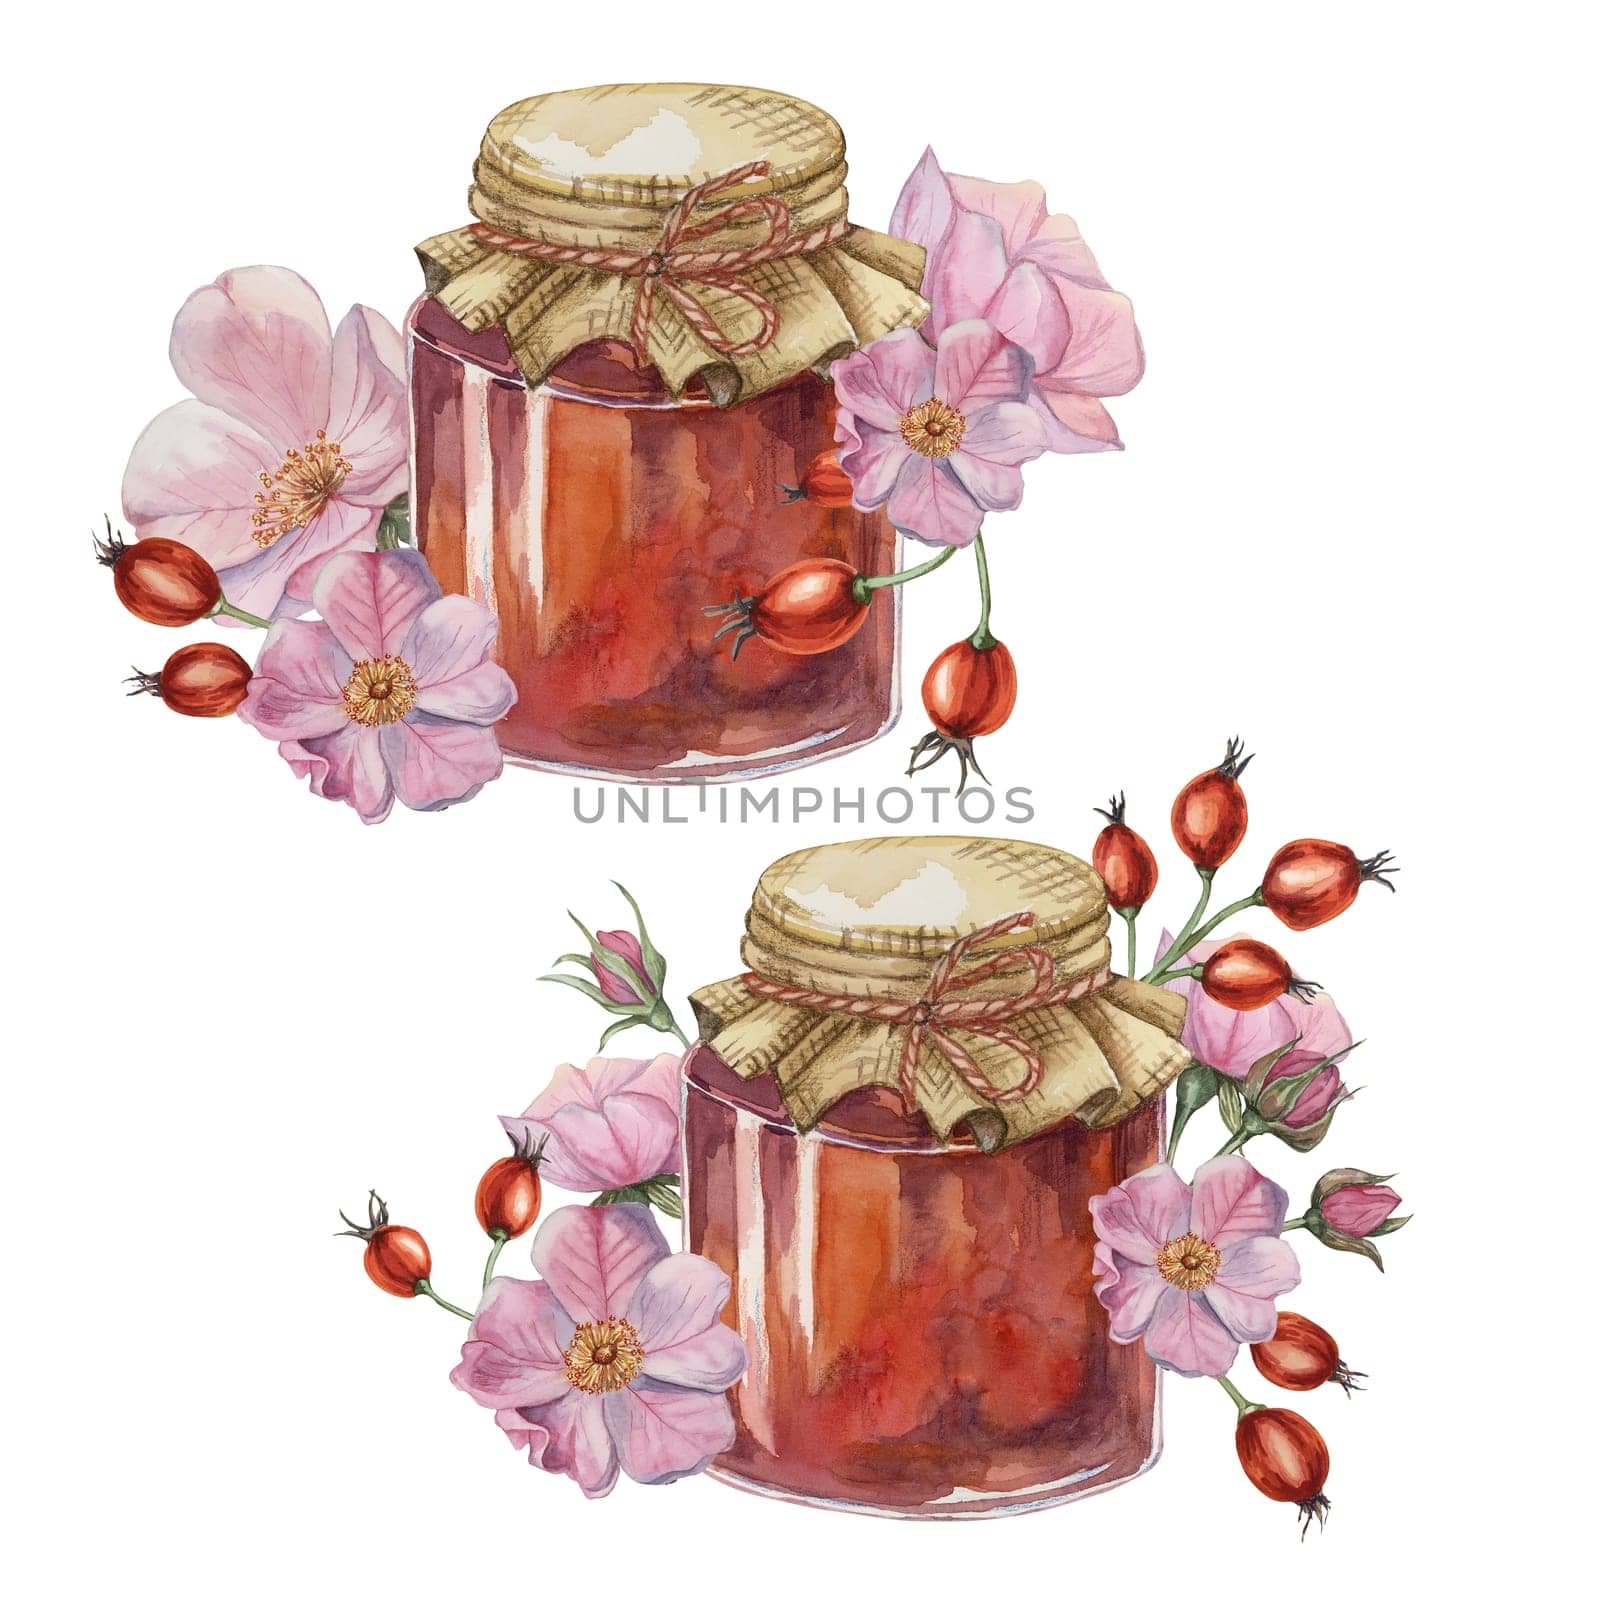 Set of home made rose hip jam in glass jar with fabric lid rope bow. Pancake, donut filling traditional Austrian German Swiss fruit preserve watercolor illustration for printing, labels, packaging